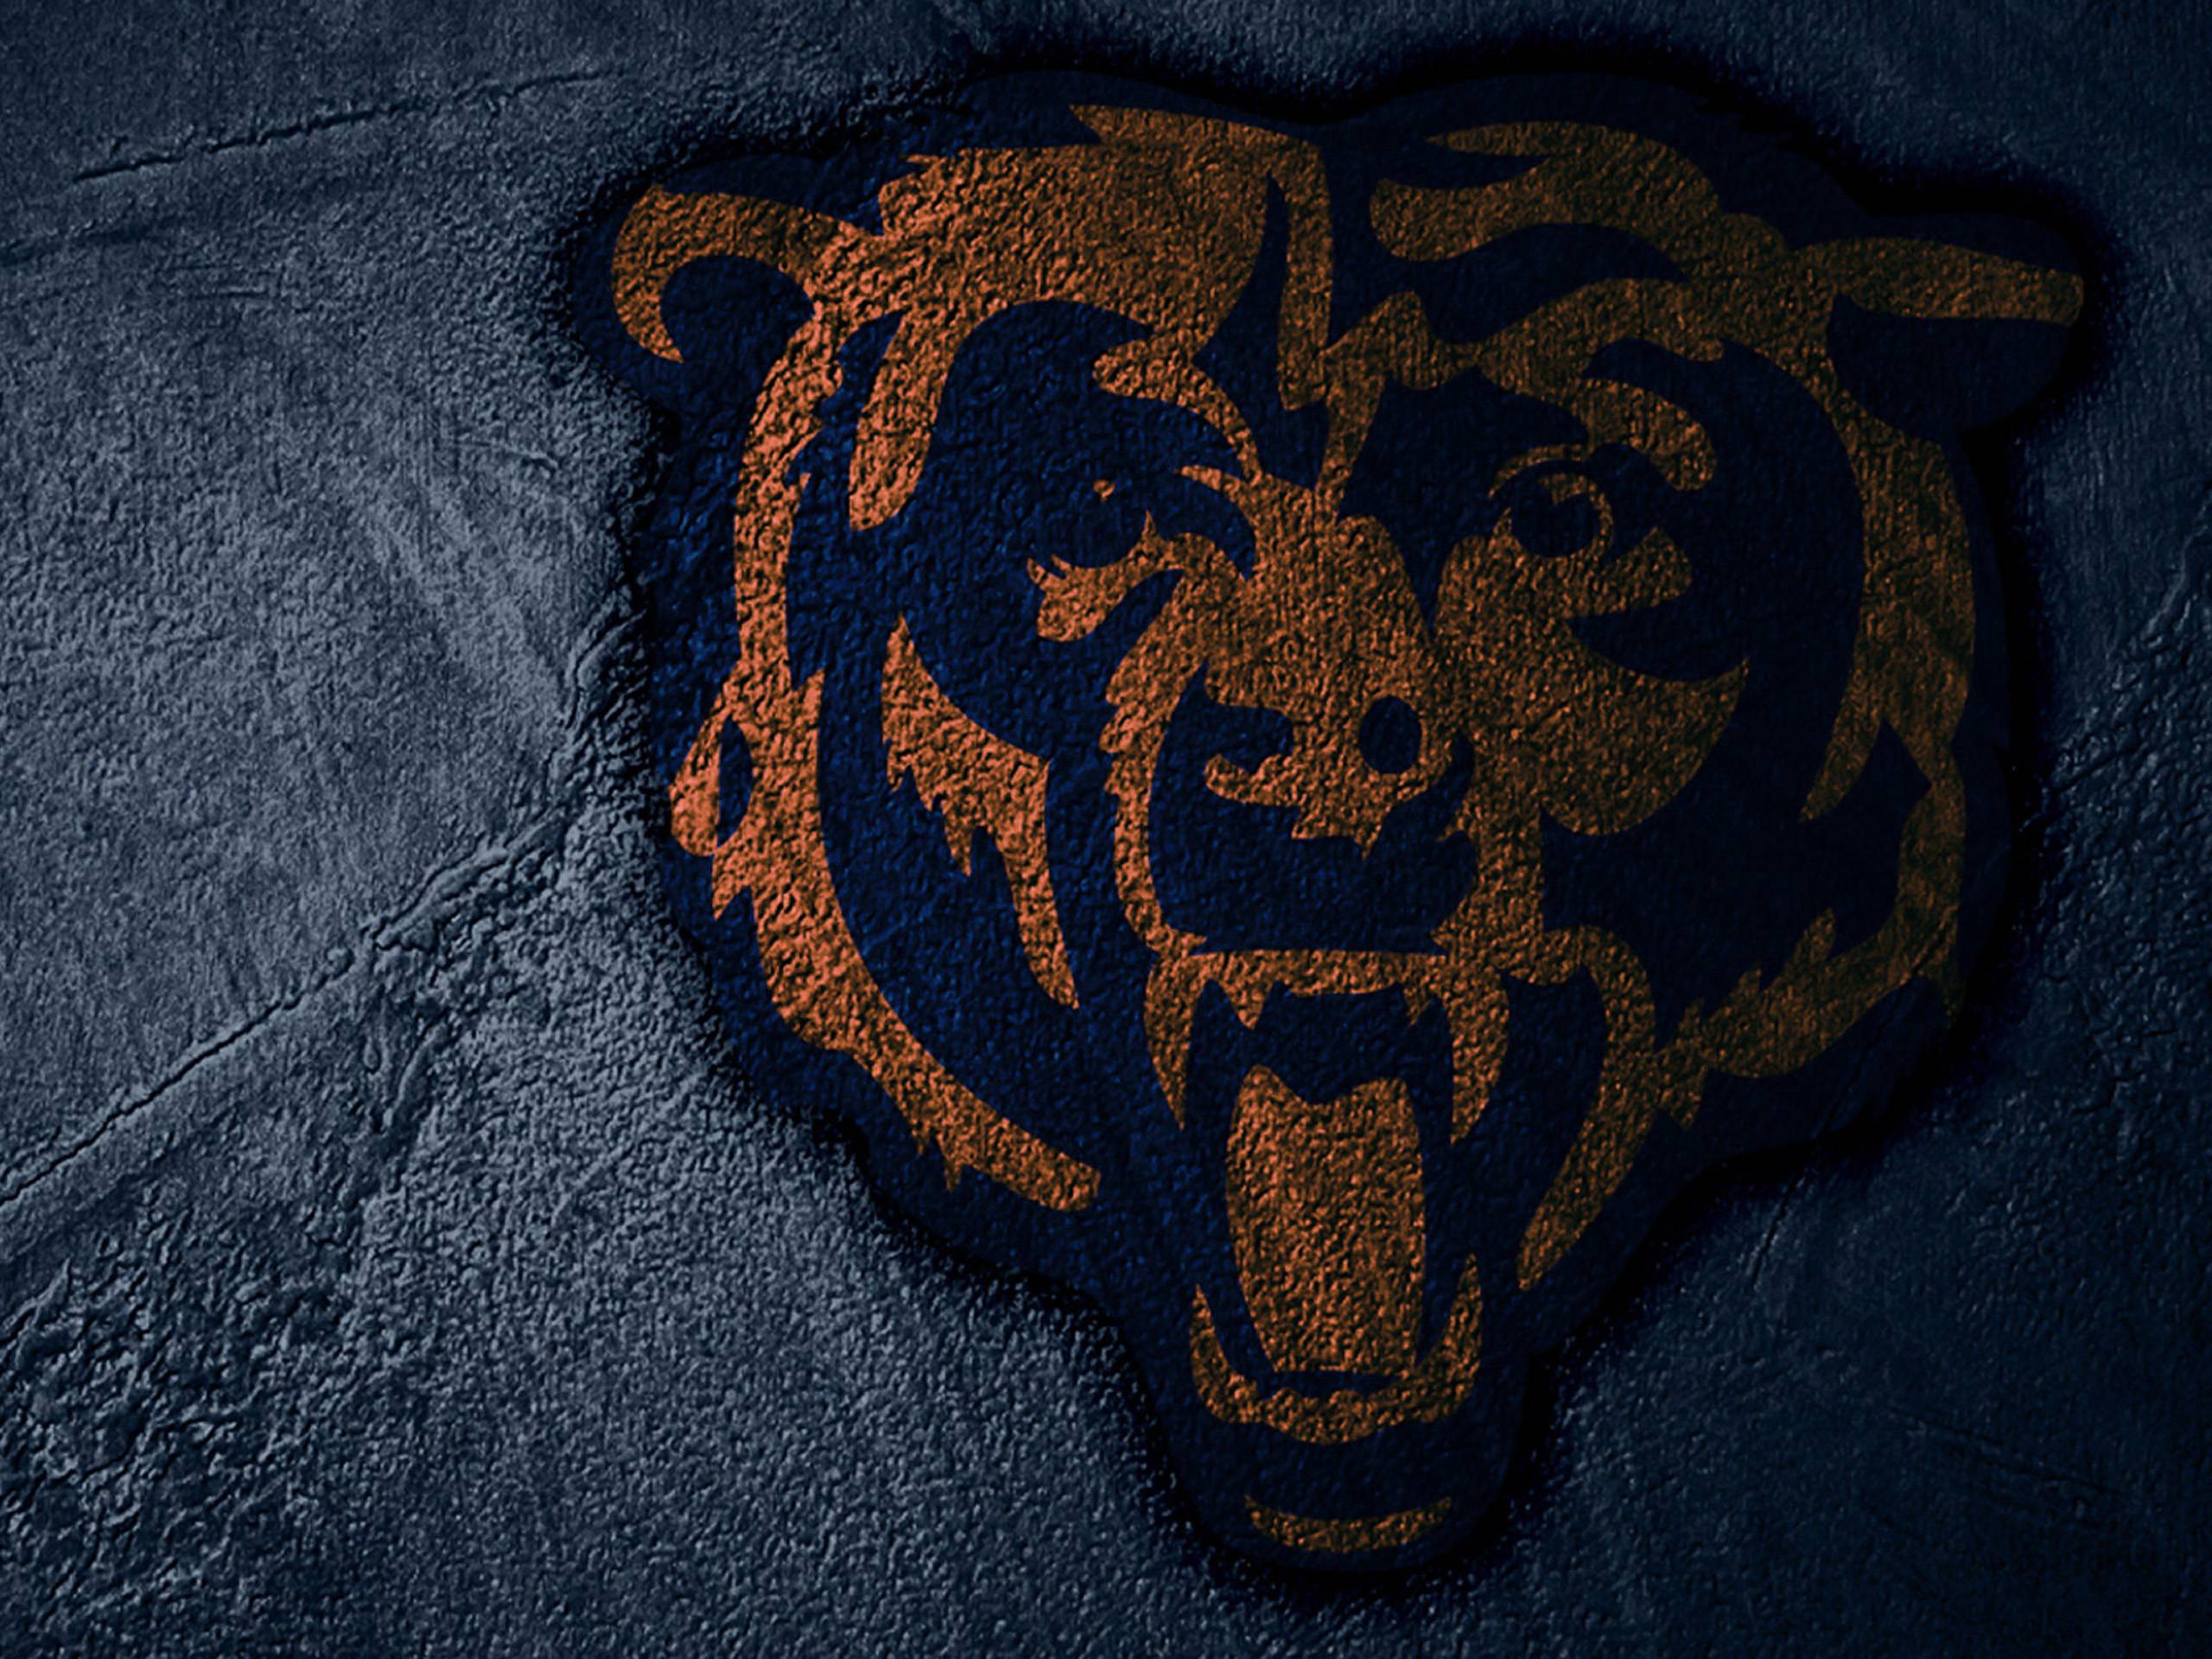 Chicago Bears NFL Wallpaper 52571 High Resolution. download all